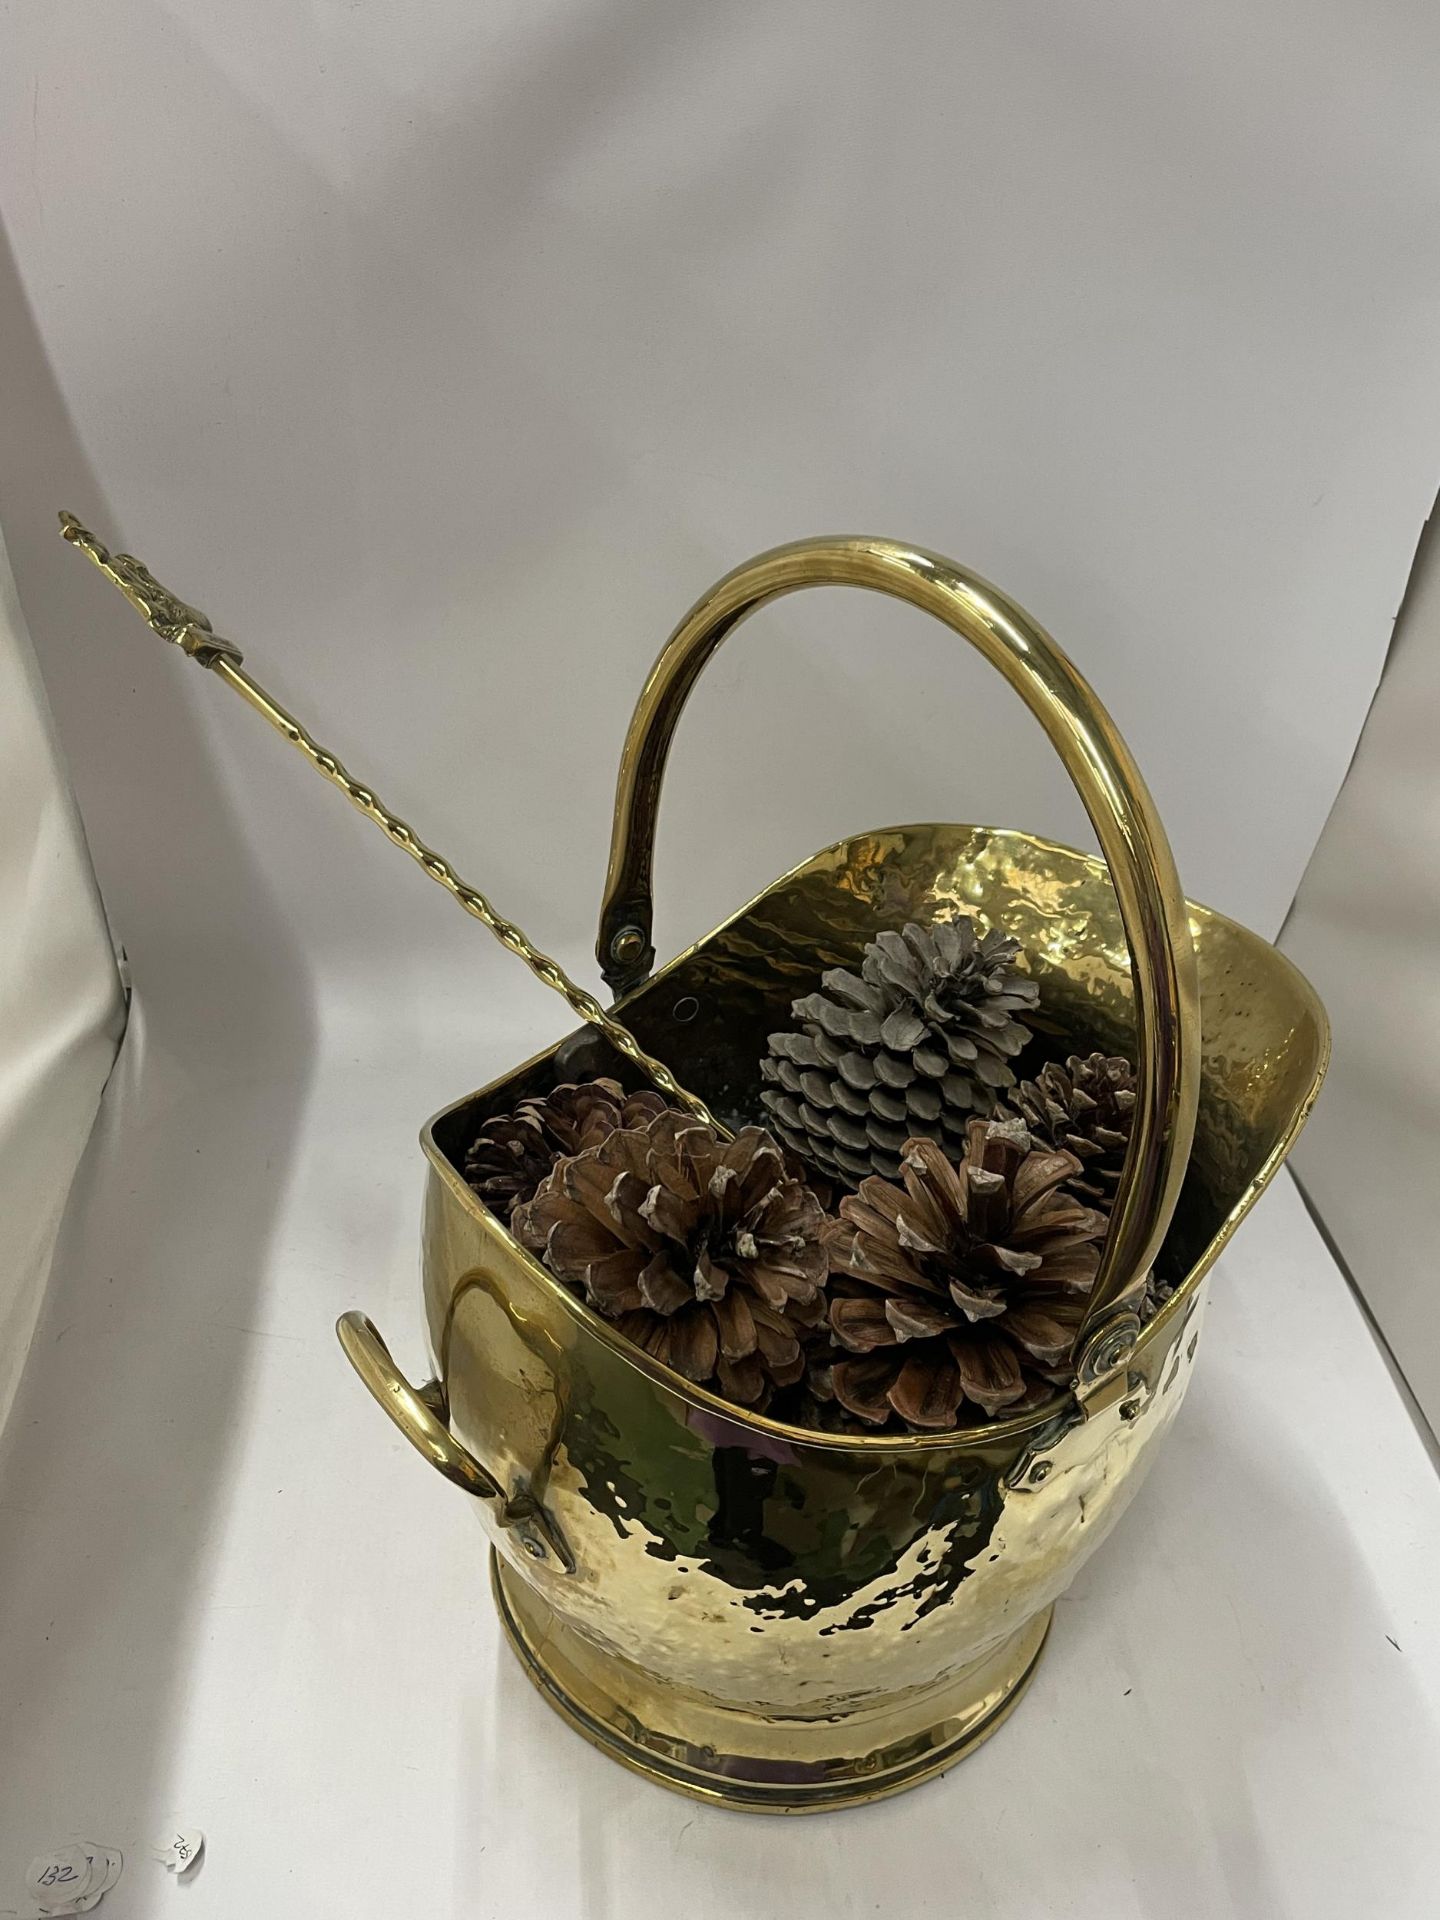 A VINTAGE HAMMERED EFFECT BRASS COAL BUCKET FILLED WITH PINE CONES - Image 3 of 3